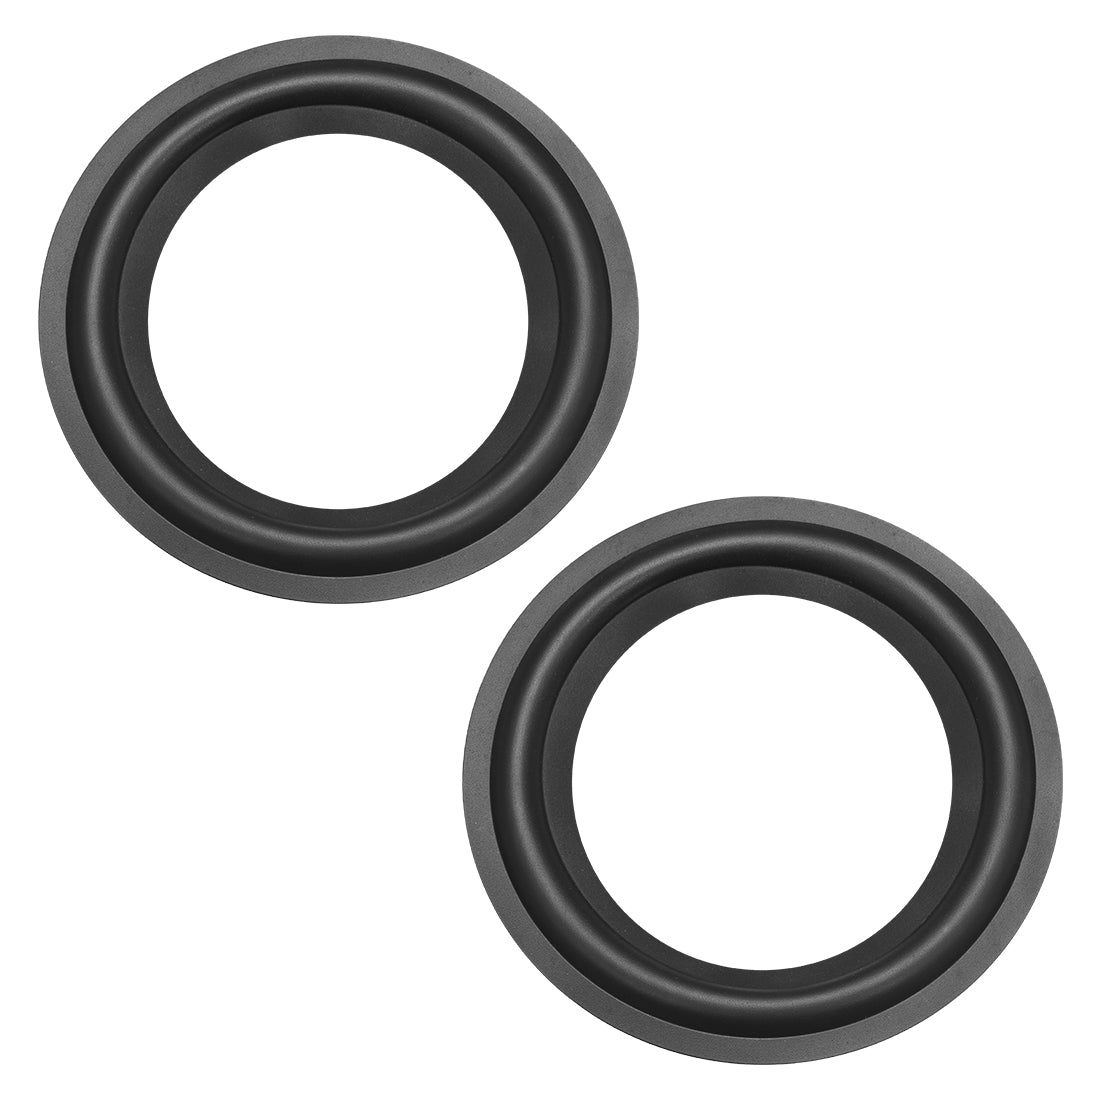 uxcell Uxcell 5.5" 5.5inch Rubber Edge Surround Rings Replacement Parts for Repair or DIY 2pcs